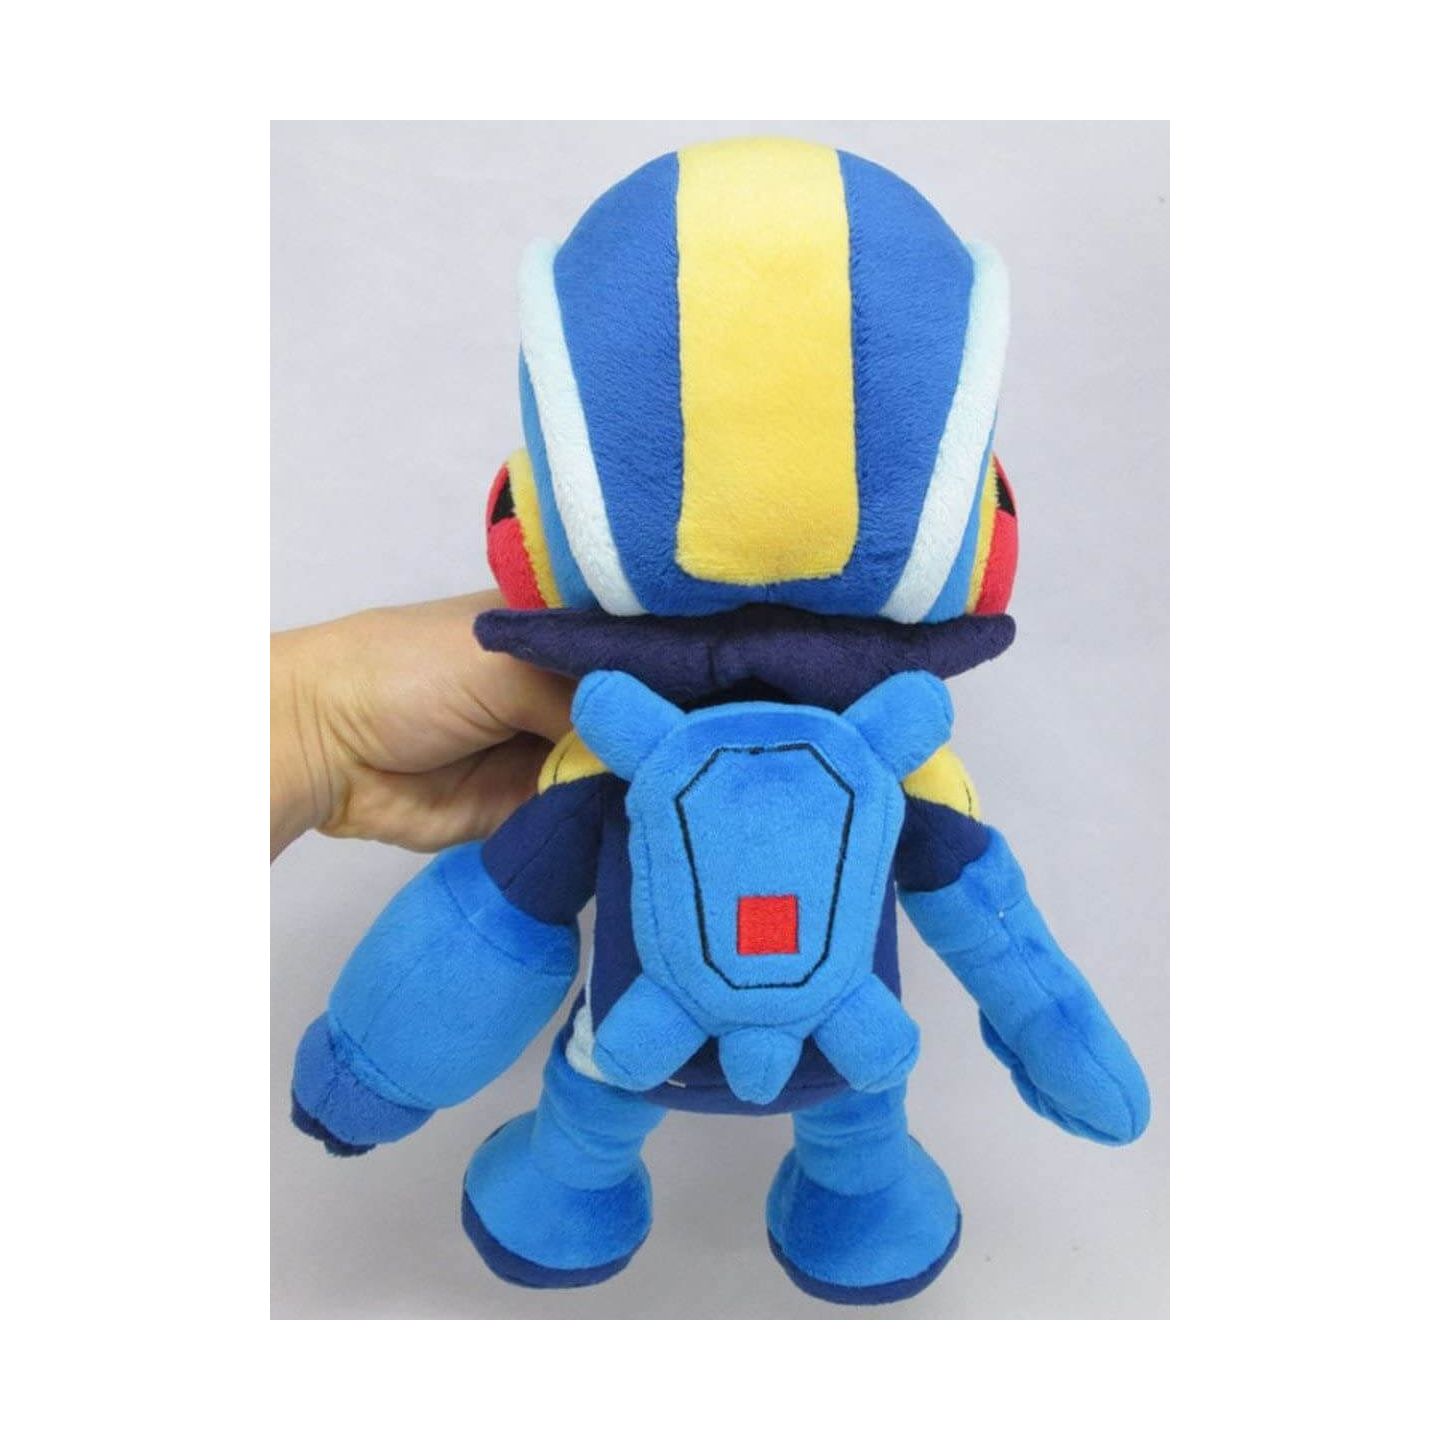 Megaman Rockman EXE All Star Collection Plush Doll 21cm Size S Japan IMOPORT for sale online 